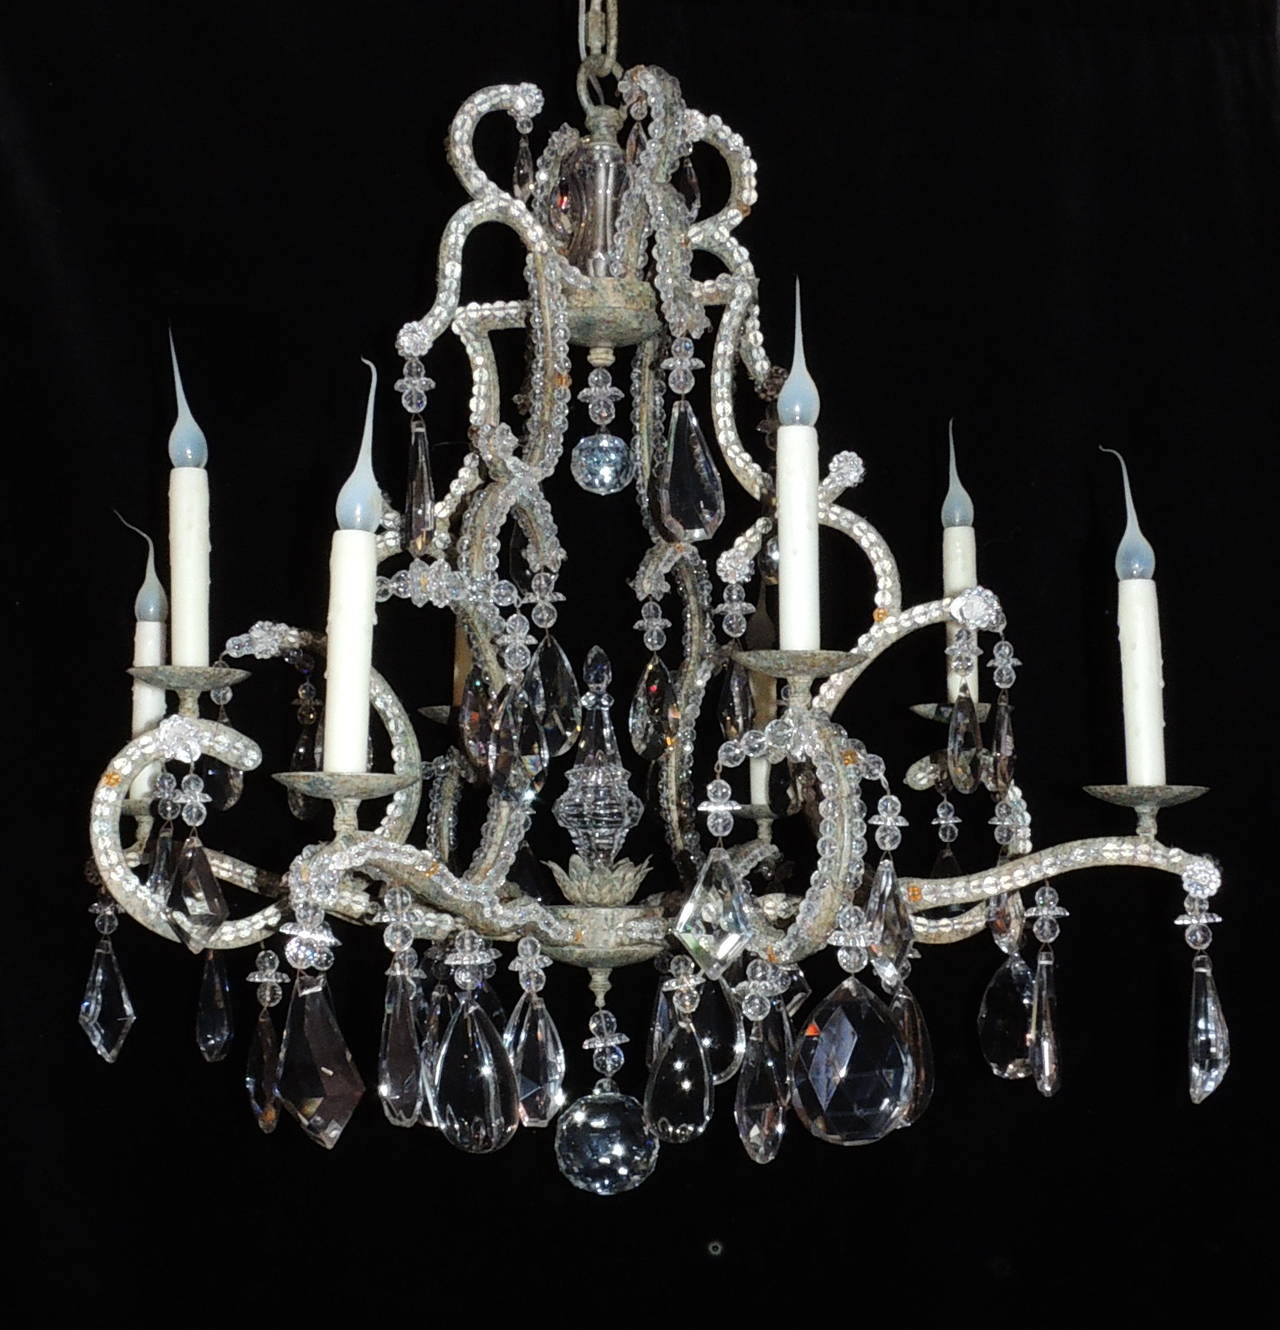 This wonderful Bagues style chandelier is a rustic finish with eight lights. The arms are trimmed with beautiful crystal beading and decorated with drop and pendeloque and almond shaped crystals, in both prism and solid forms. A fine full piece